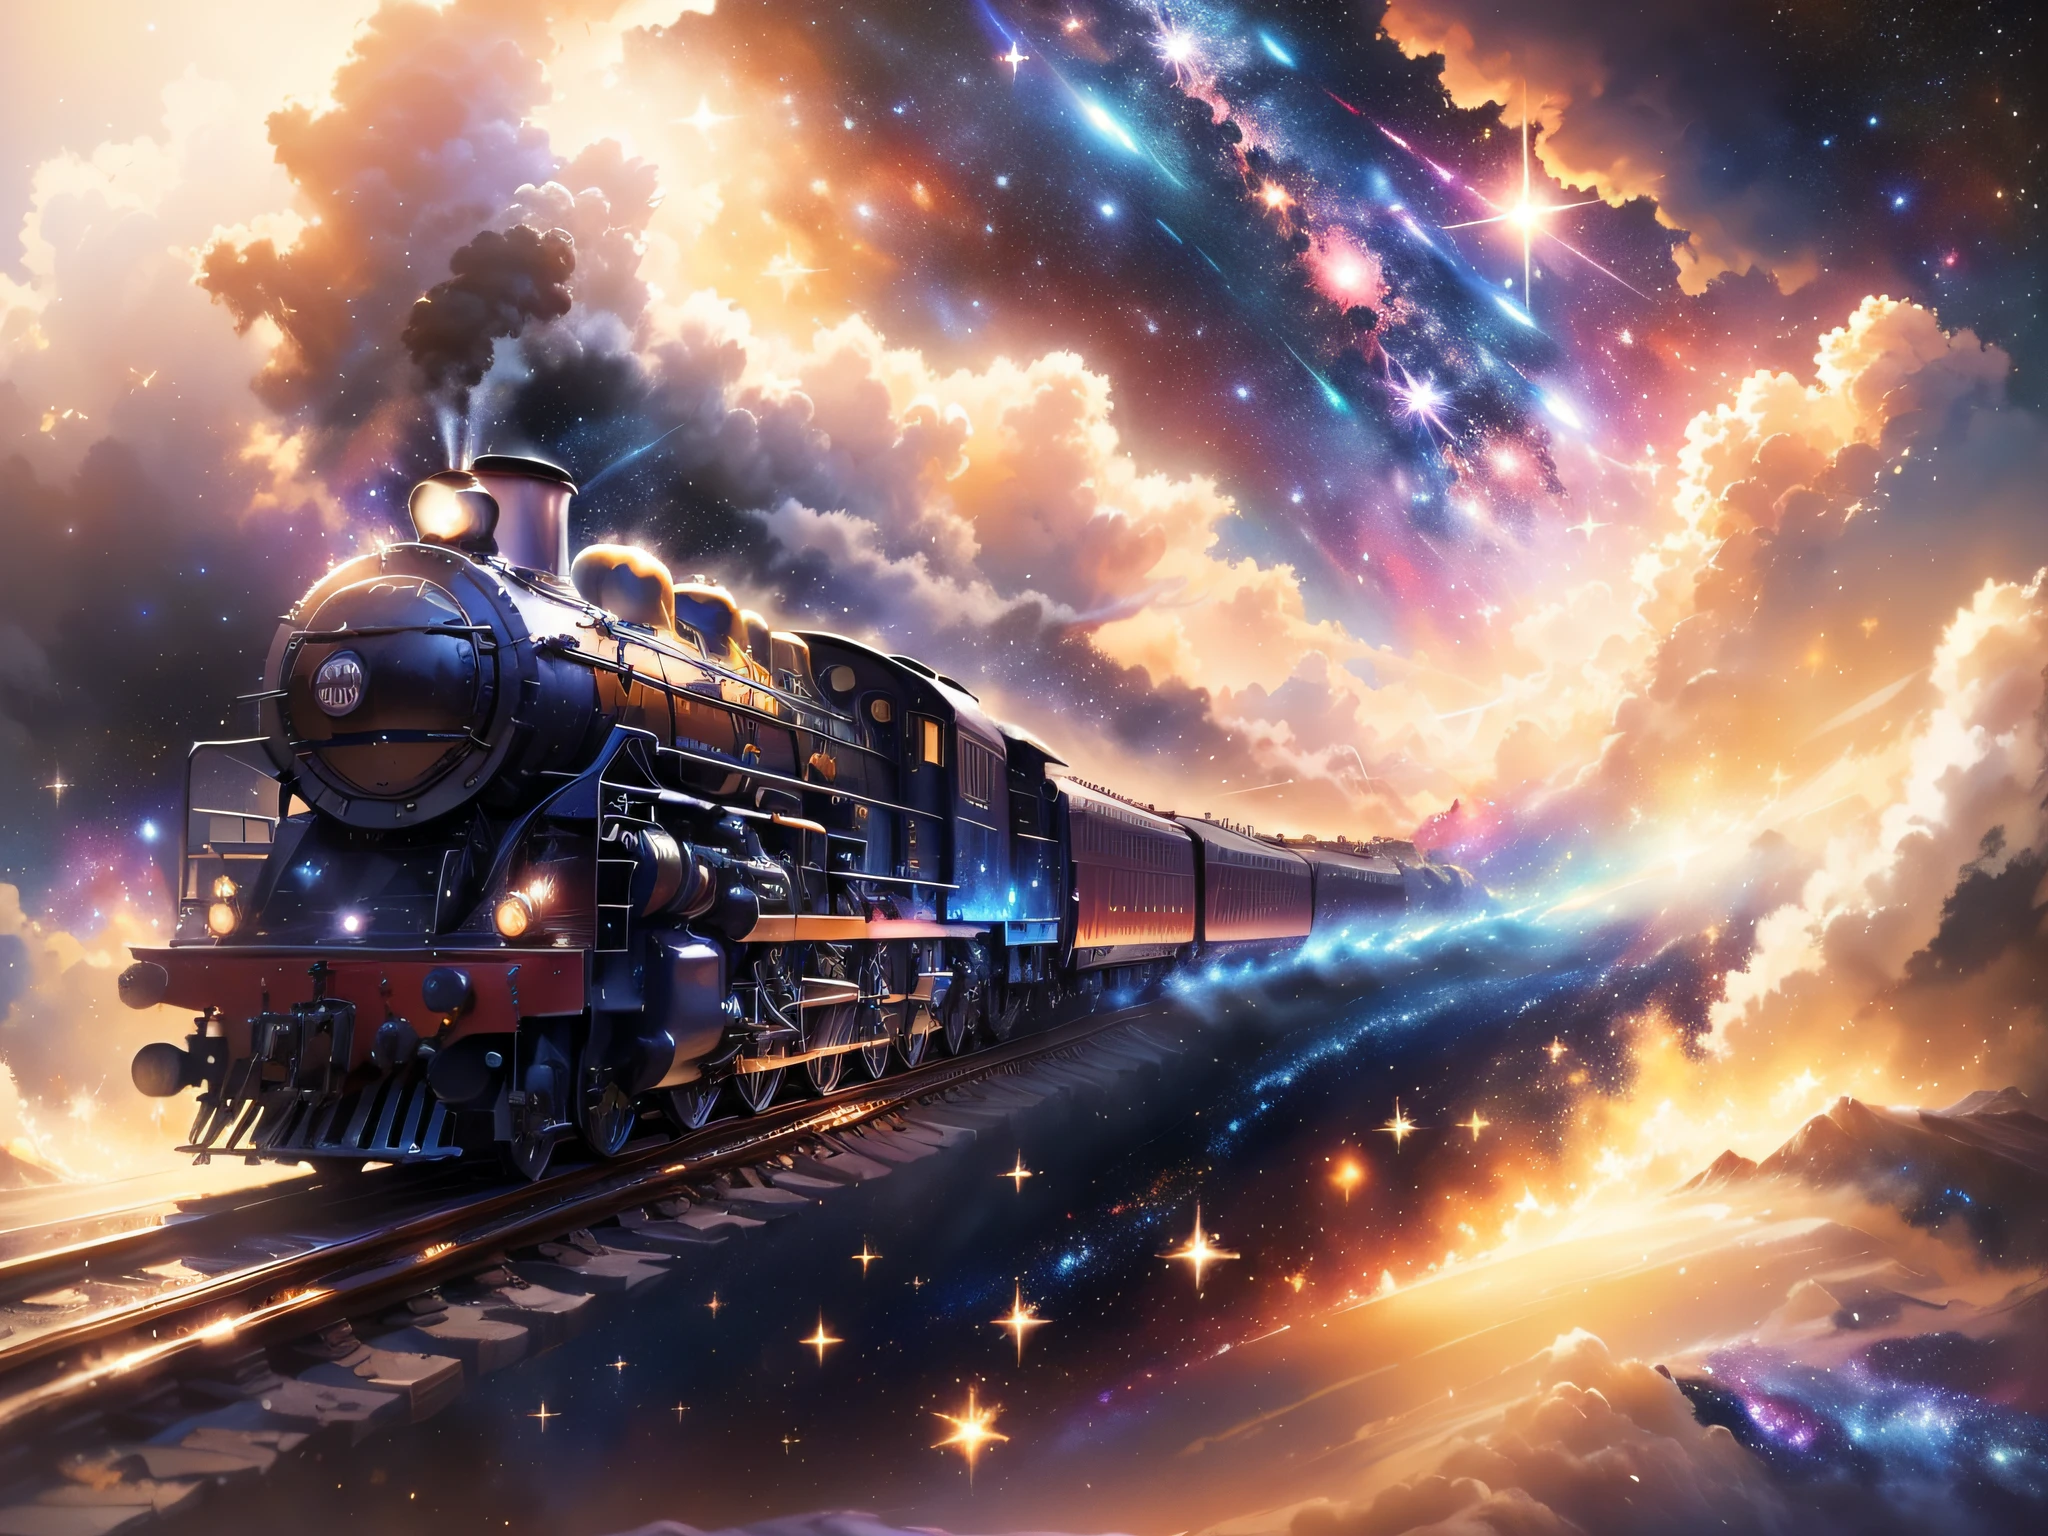 (((masutepiece))), High quality, Extremely detailed, steam locomotive running in space, Galaxy Railway, spaces, (galaxies background:1.2), superfine illustration, (((water painting))), realphoto, line-drawing, Approaching perfection, Insanely detailed, Concept art, epicd, Cinematic,